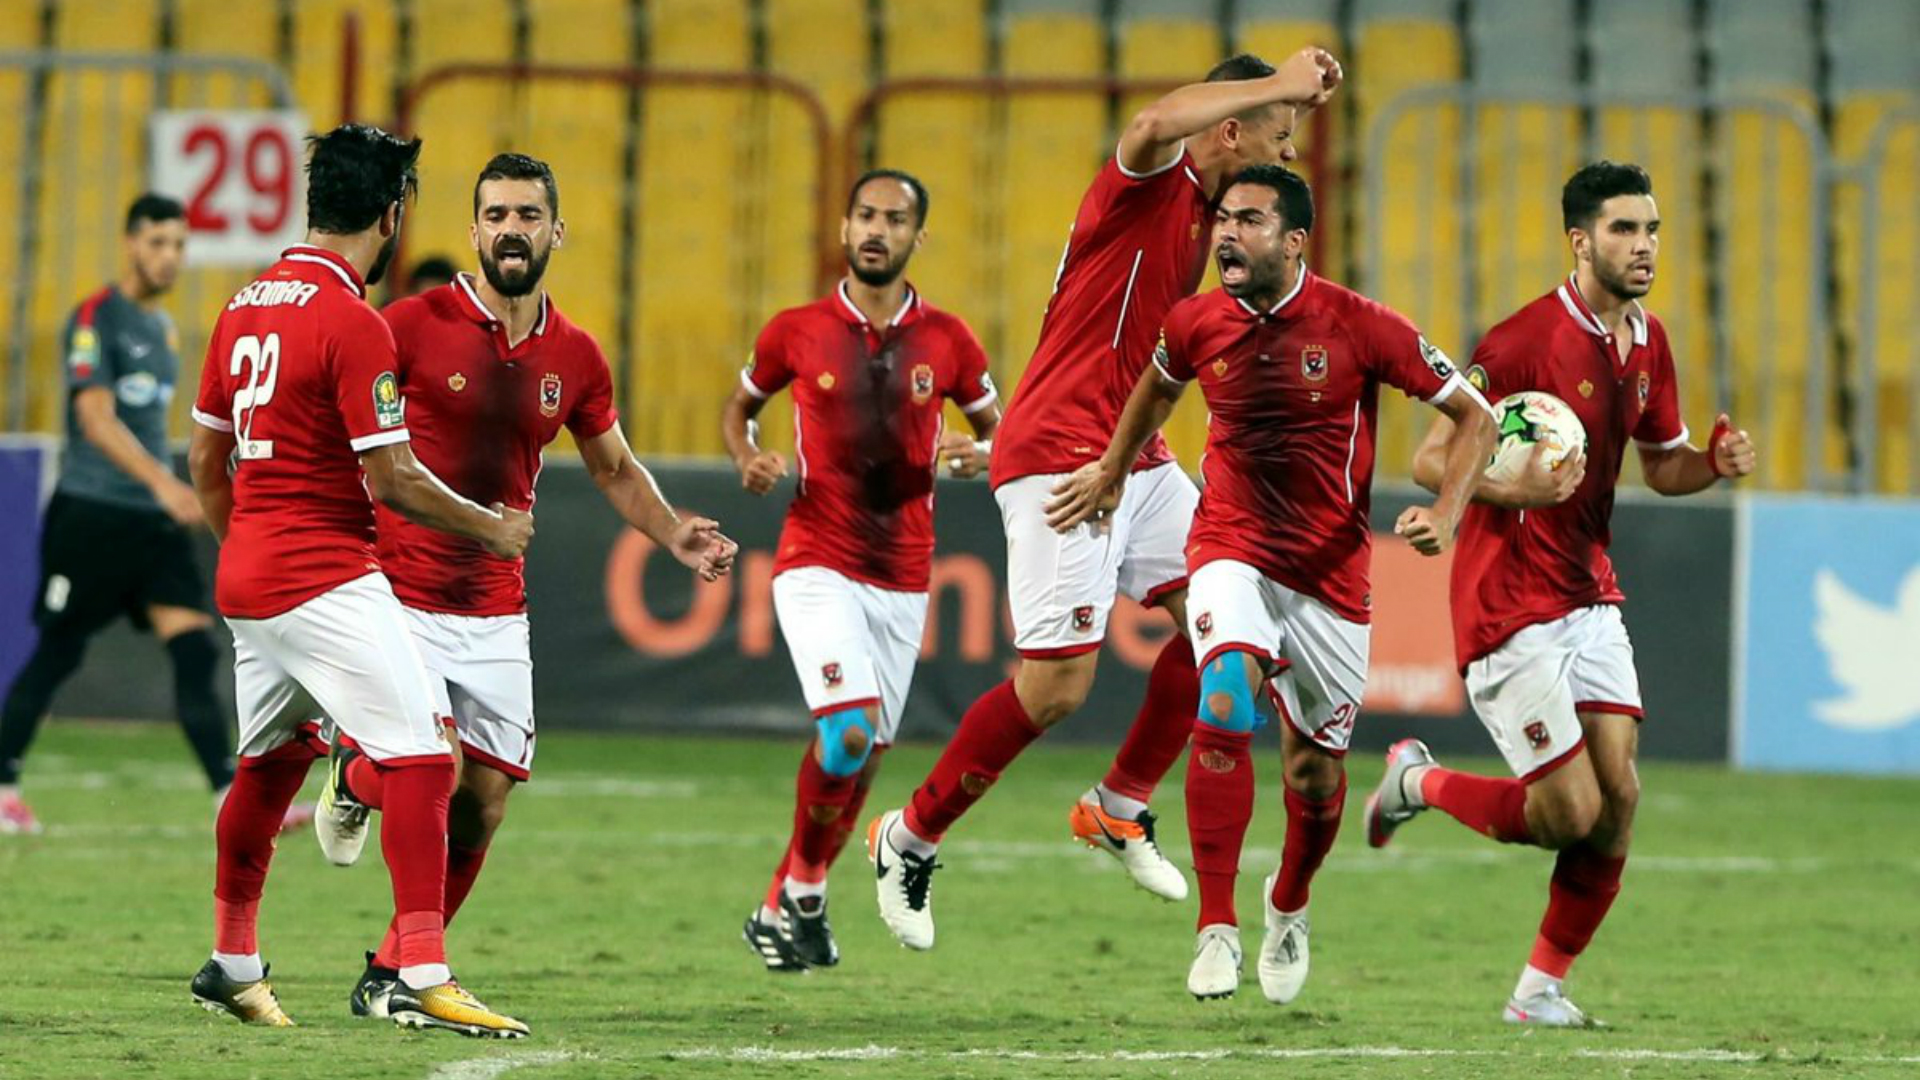 Al Ahly advances to final in dazzling style